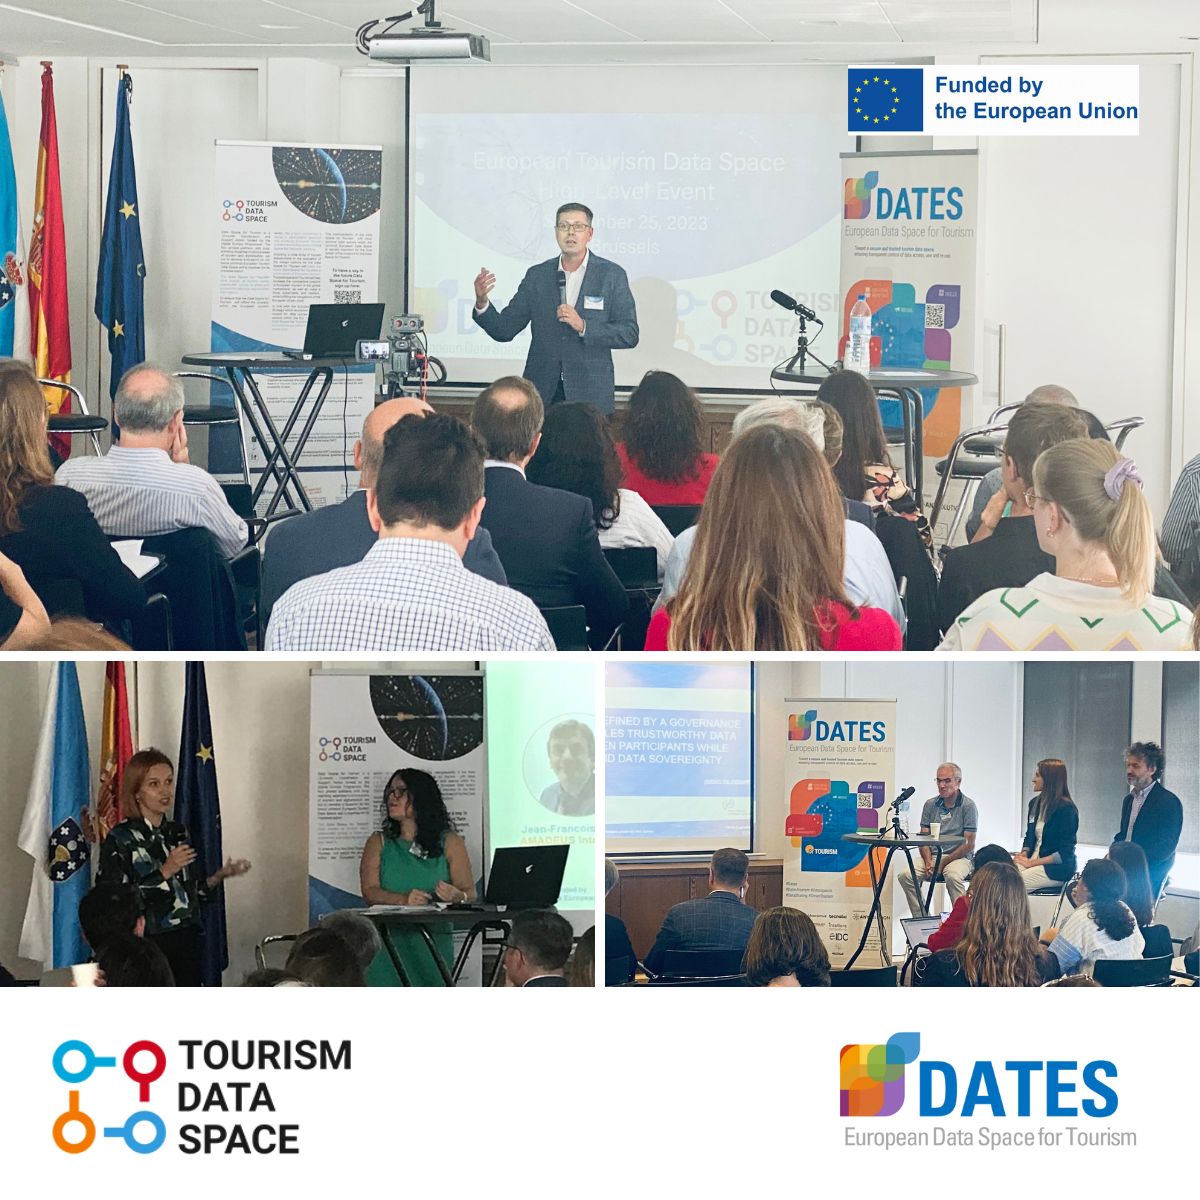 The Common #European #Tourism #DataSpace event is in full in progress and the future Tourism Data Space is taking shape thanks to insightful discussions with tourism stakeholders. @moduluniversity @citydna_eu @ETC_Corporate @ForwardKeys @datestourism